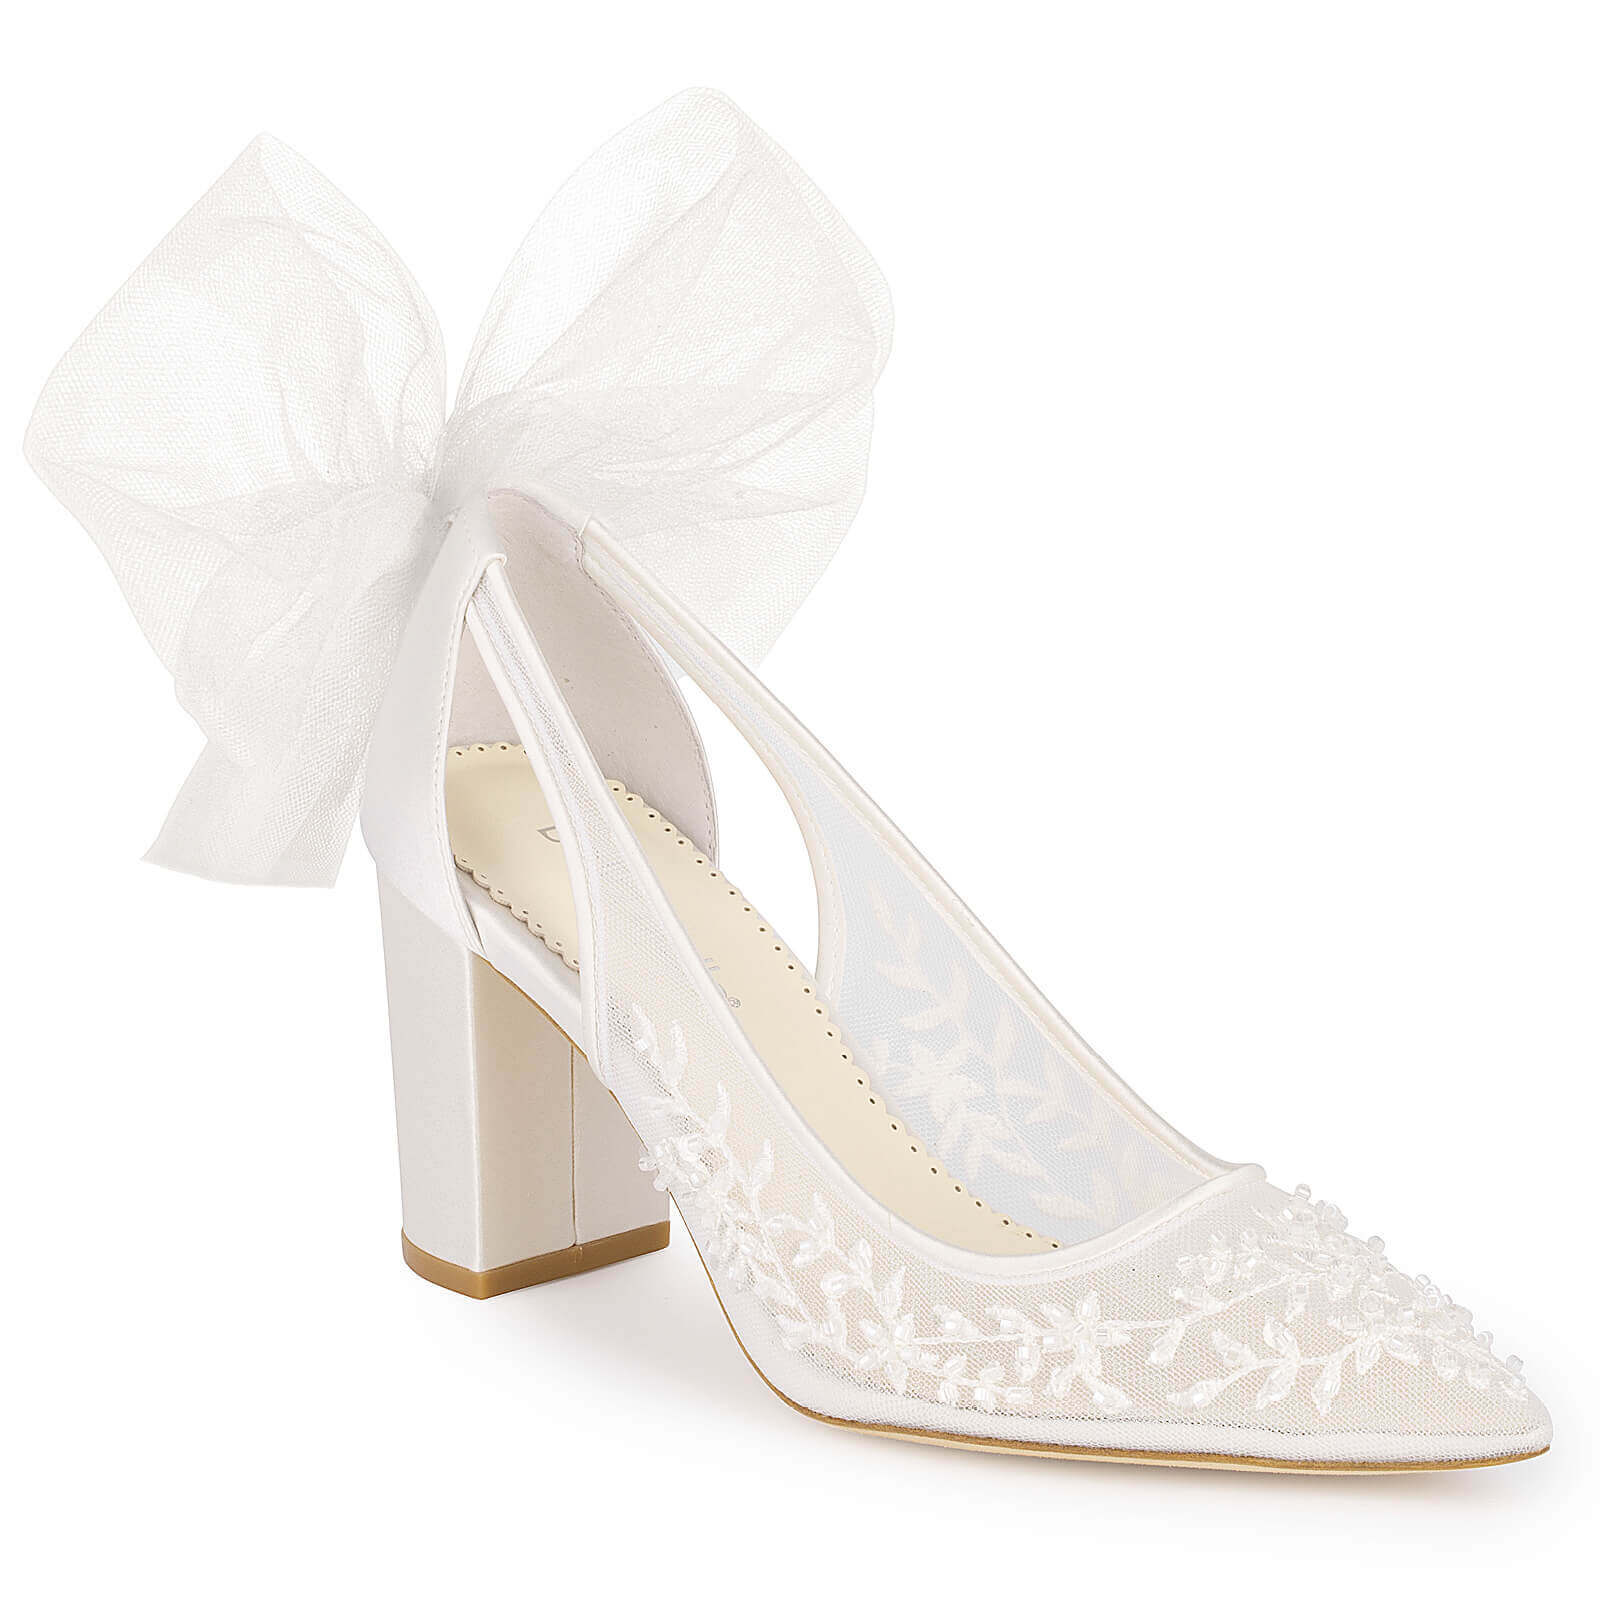 Easton - Block Heel Wedding Shoes With Tulle Bow